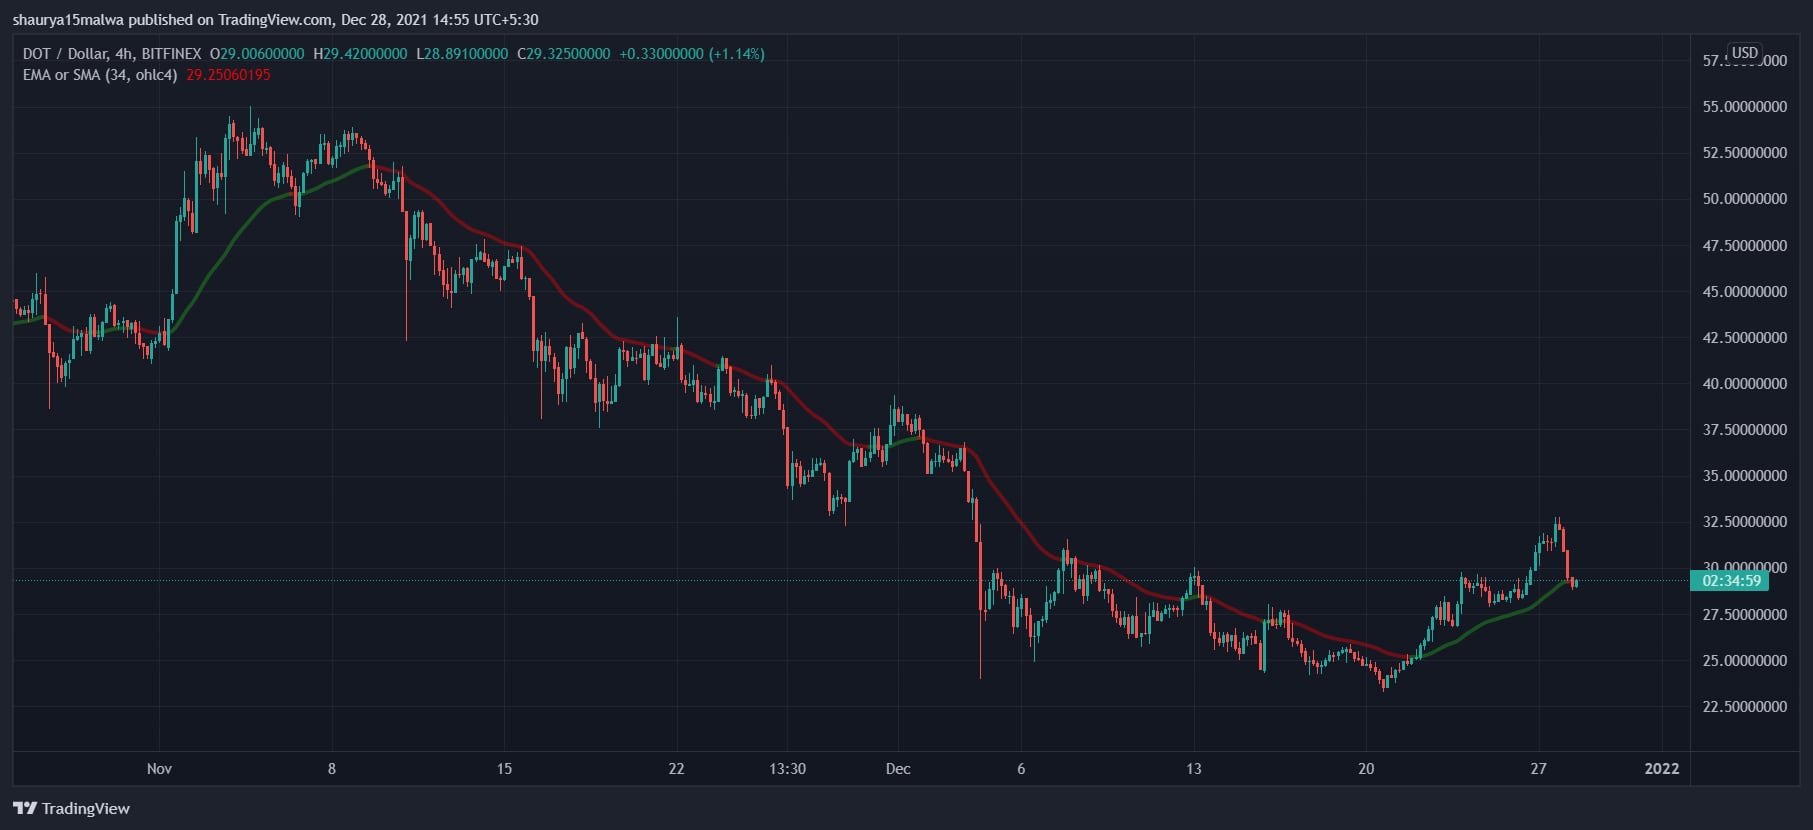 DOT remain in a downtrend since November 2021. (TradingView)